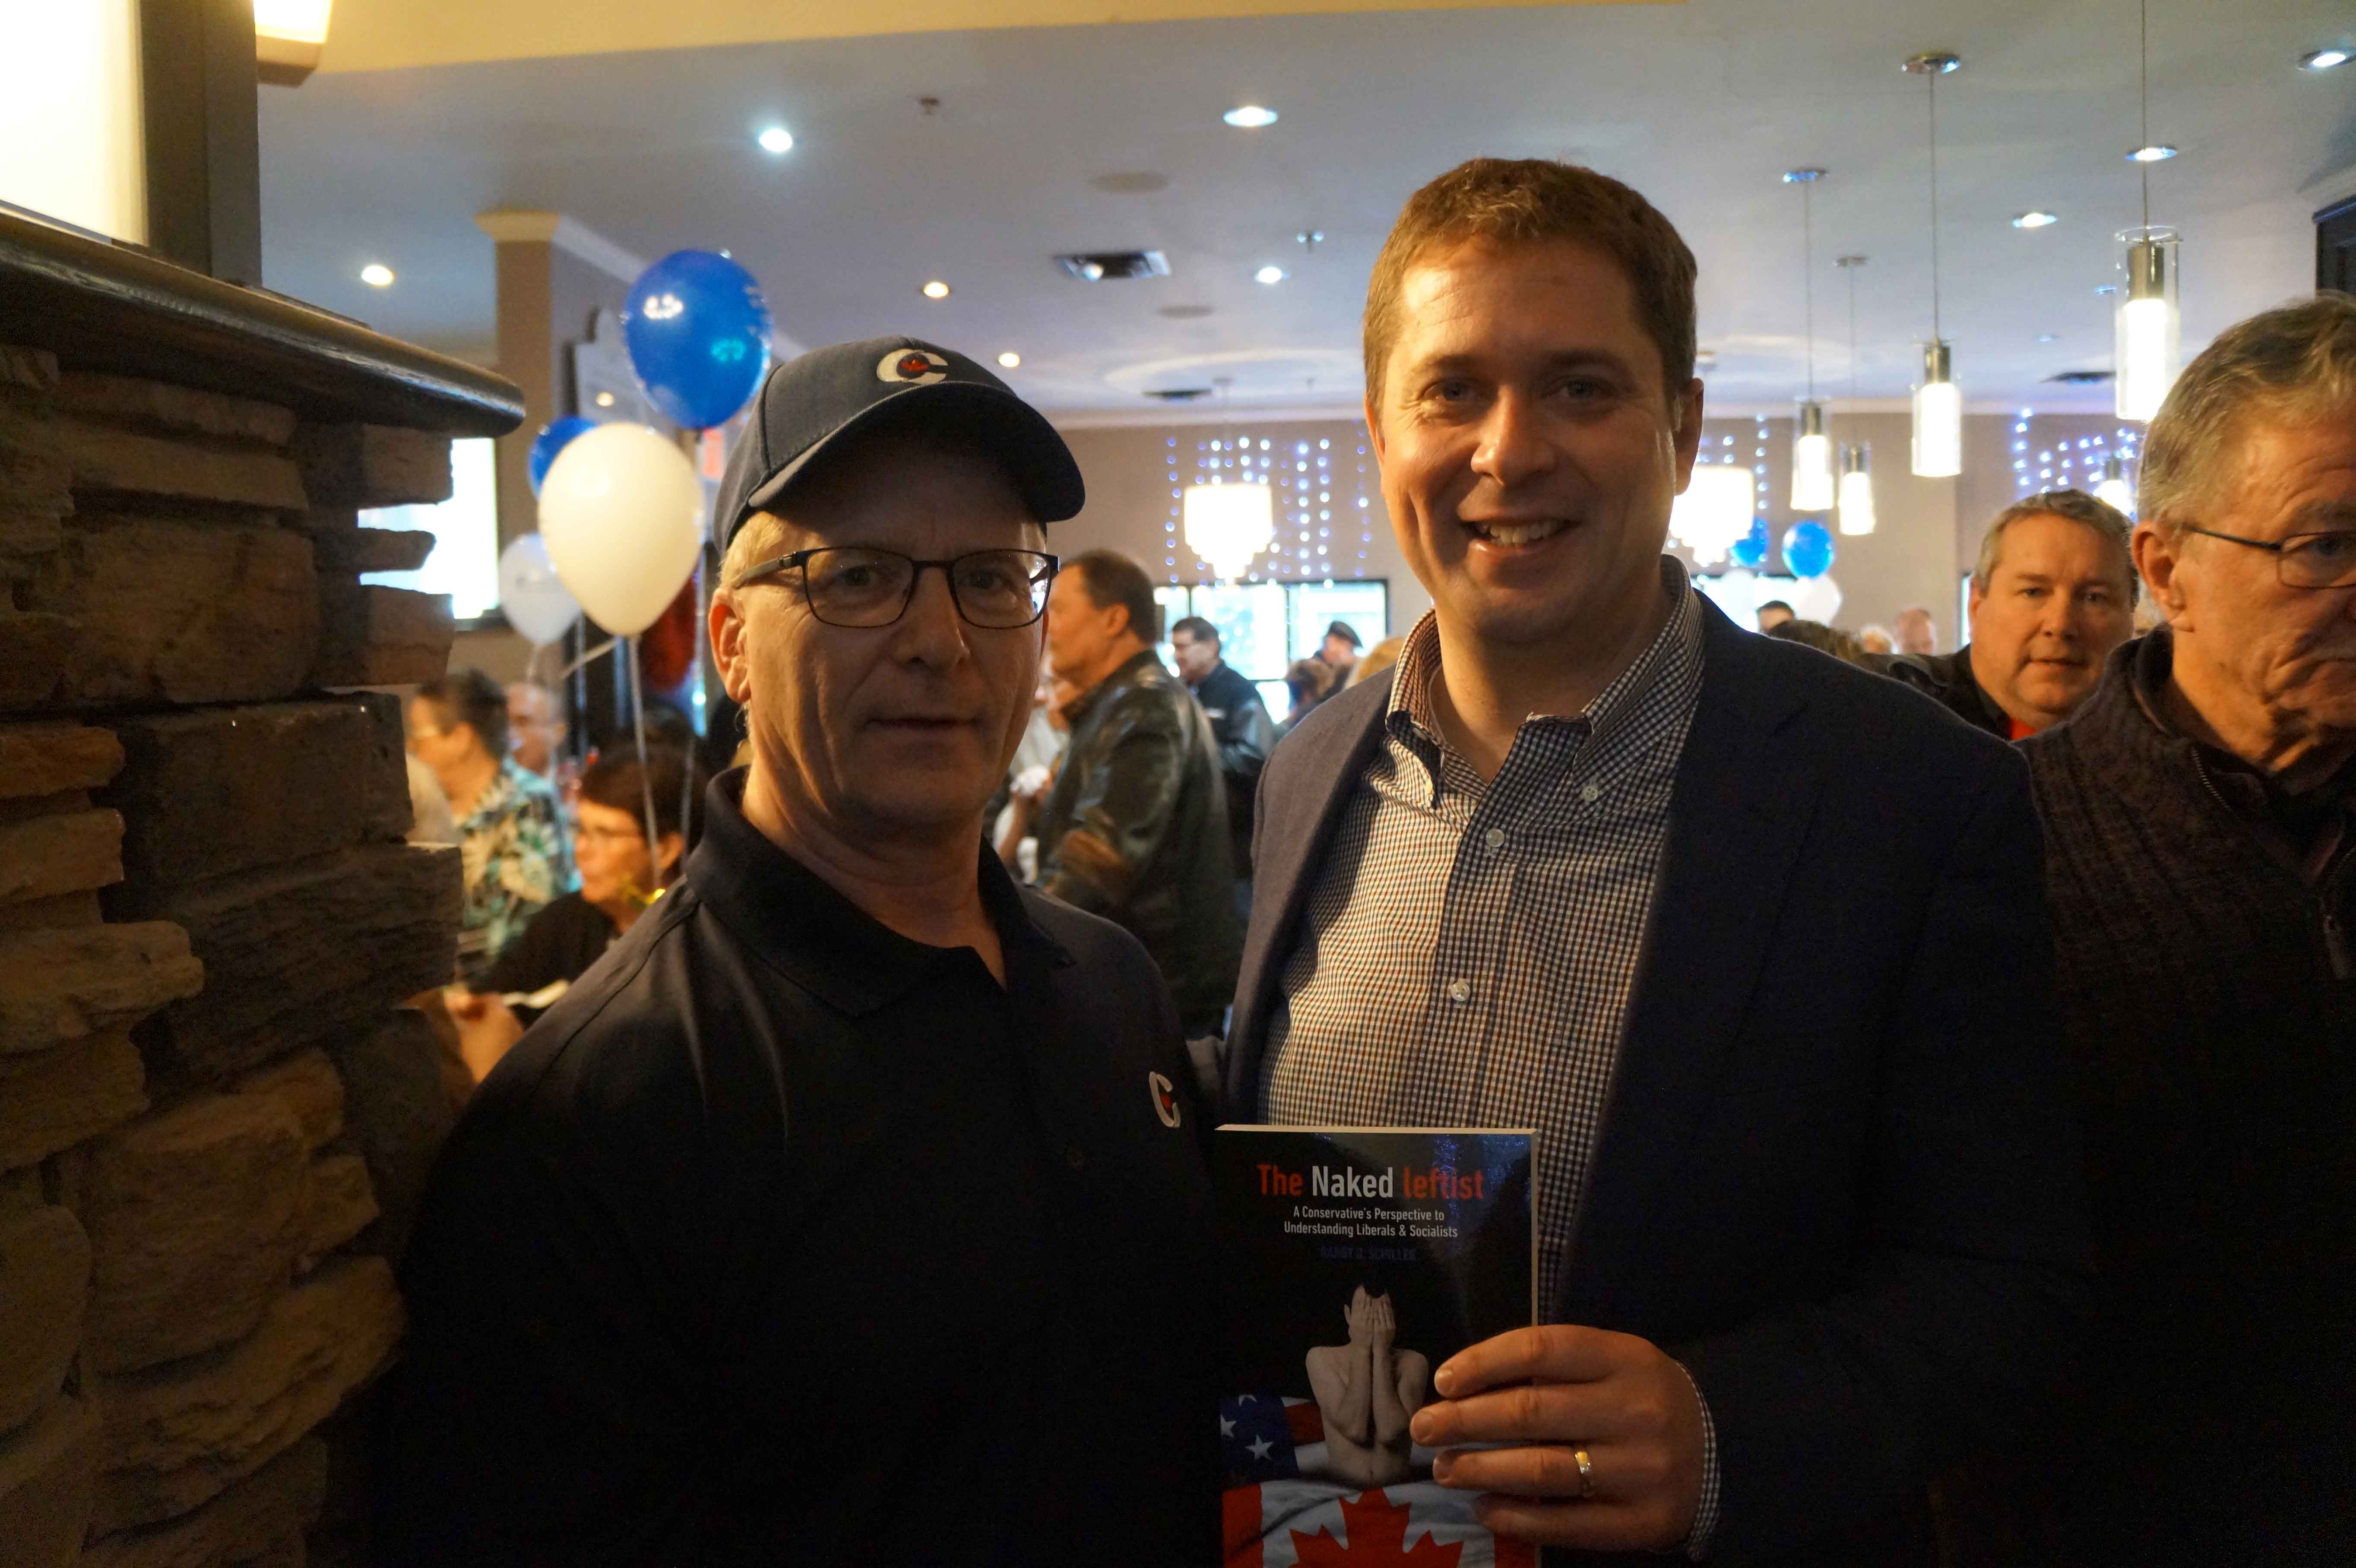 Randy with the next Prime Minister, Honourable Andrew Scheer, Regina, May 2018